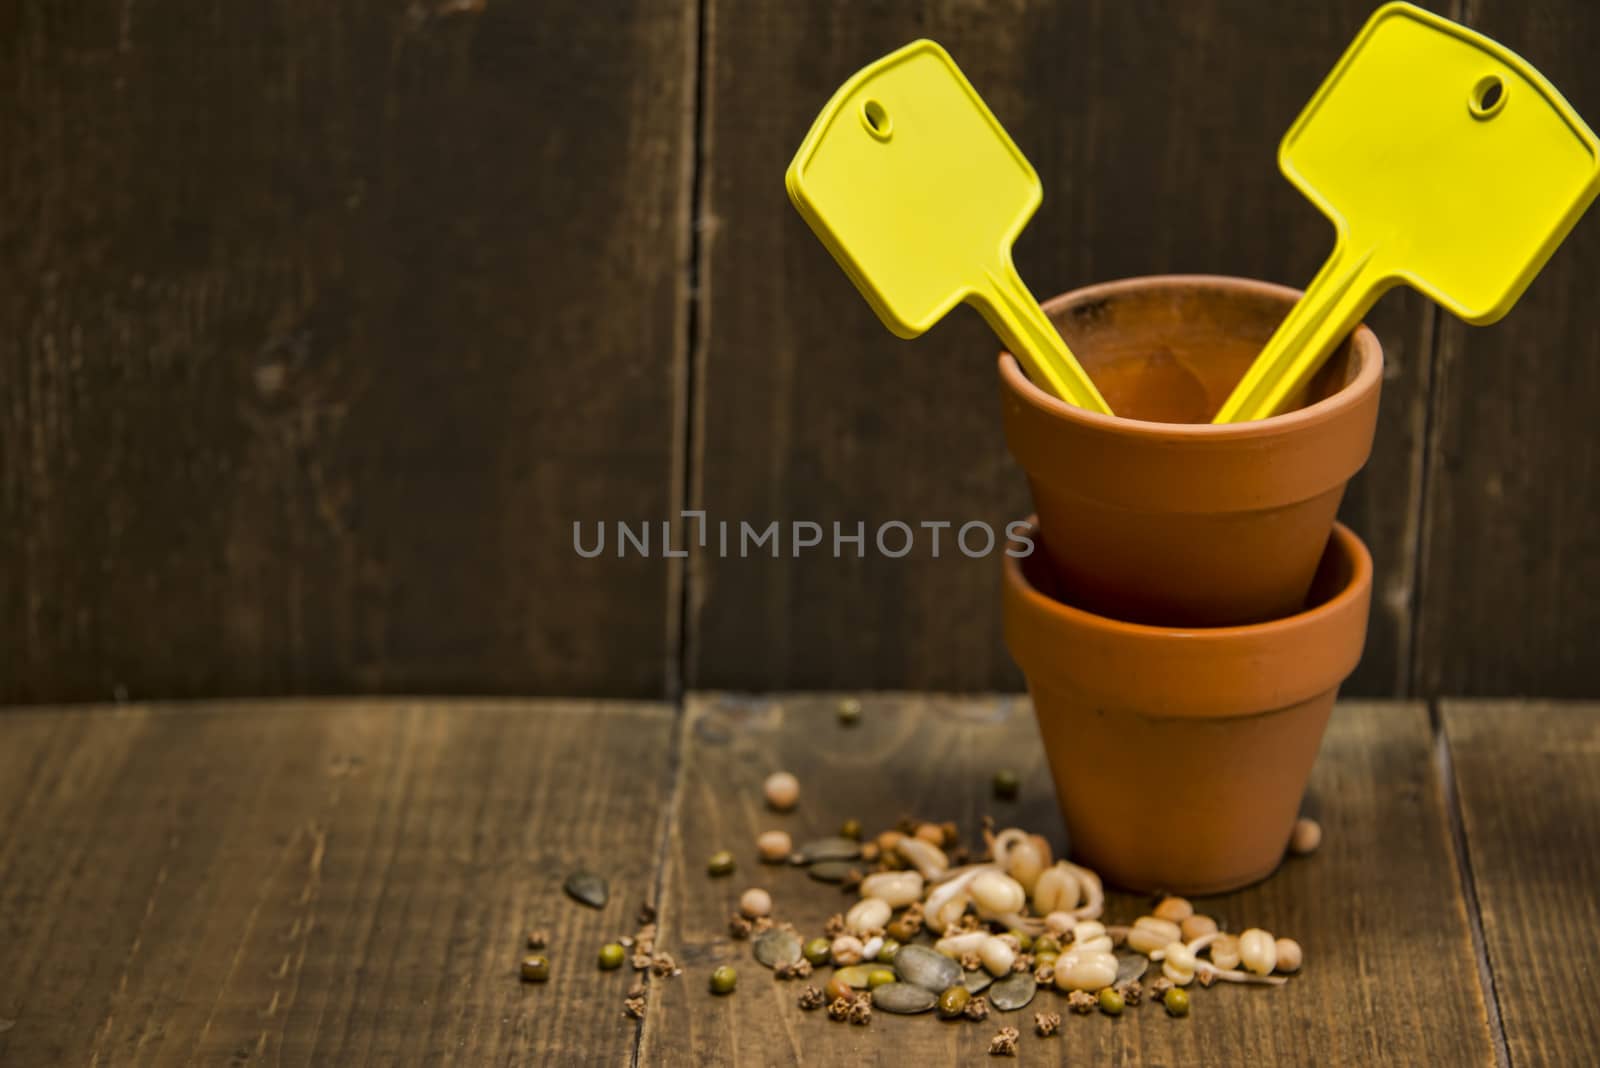 Seeds and containers by GryT